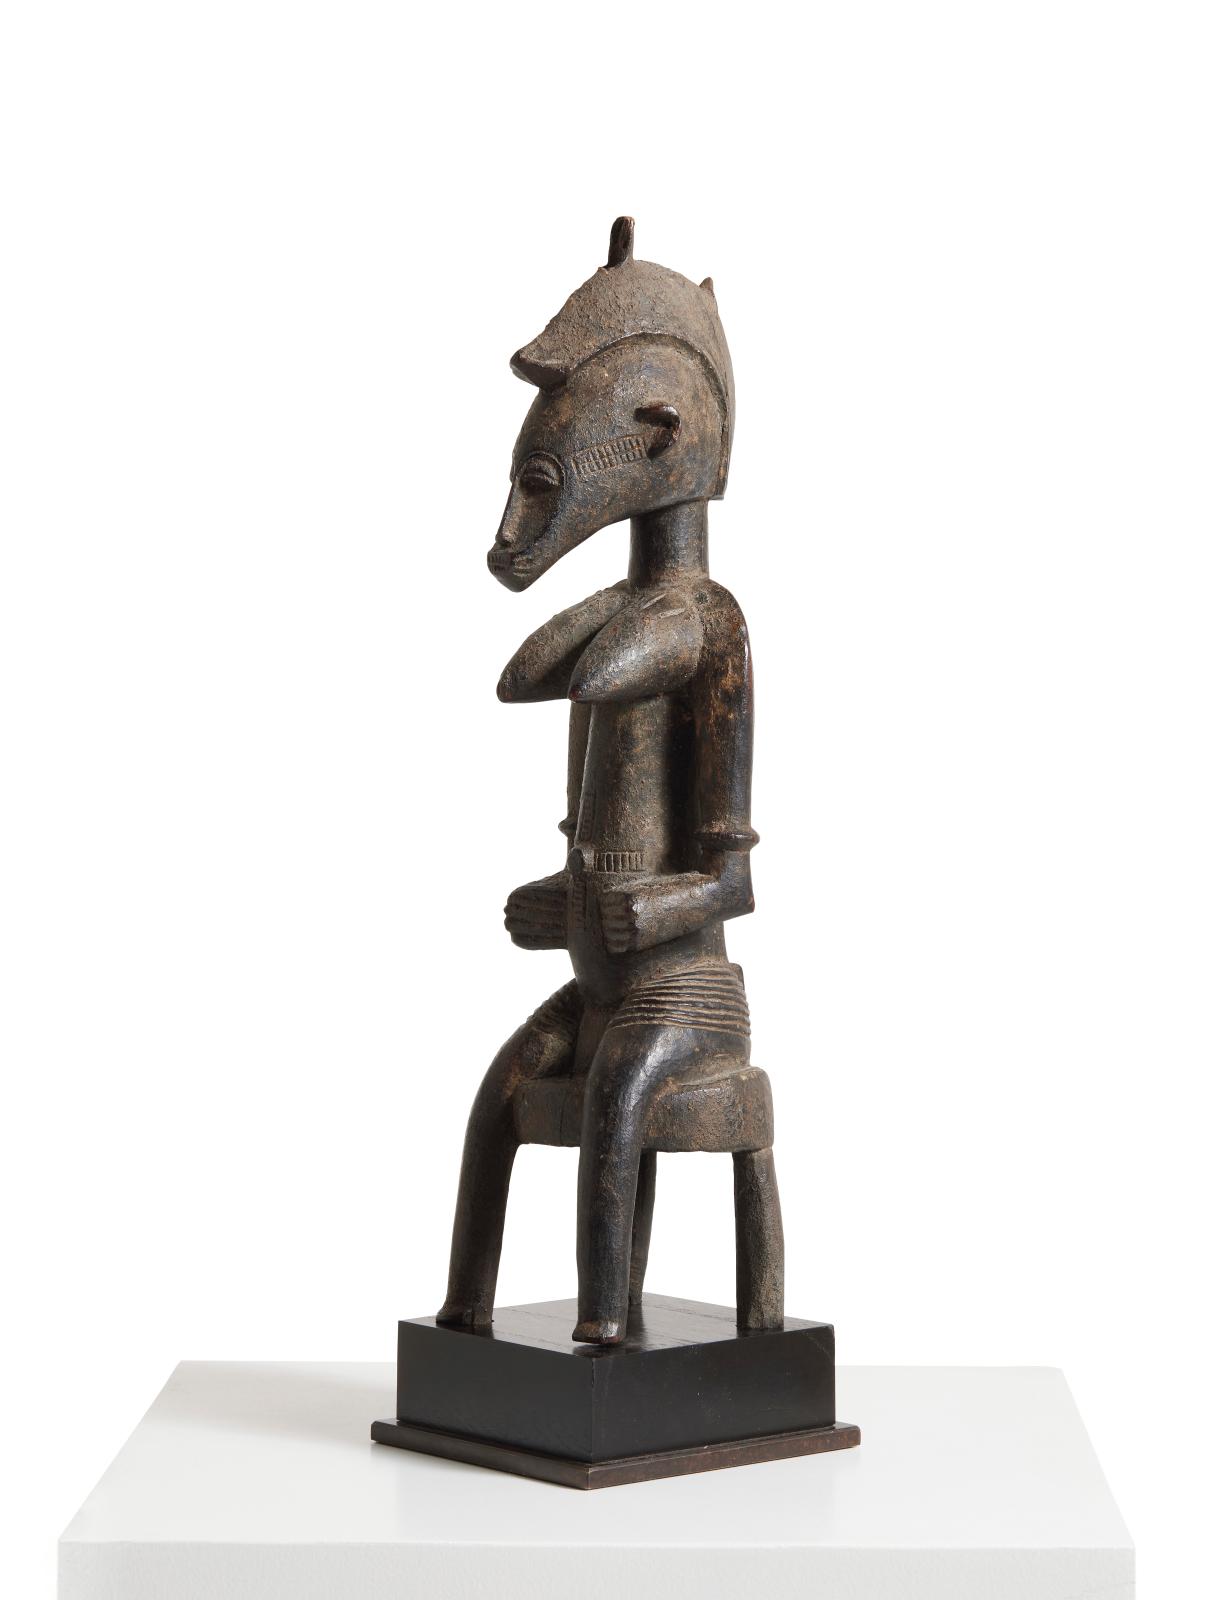 The World of Decorative Arts from Giacometti to African Sculpture